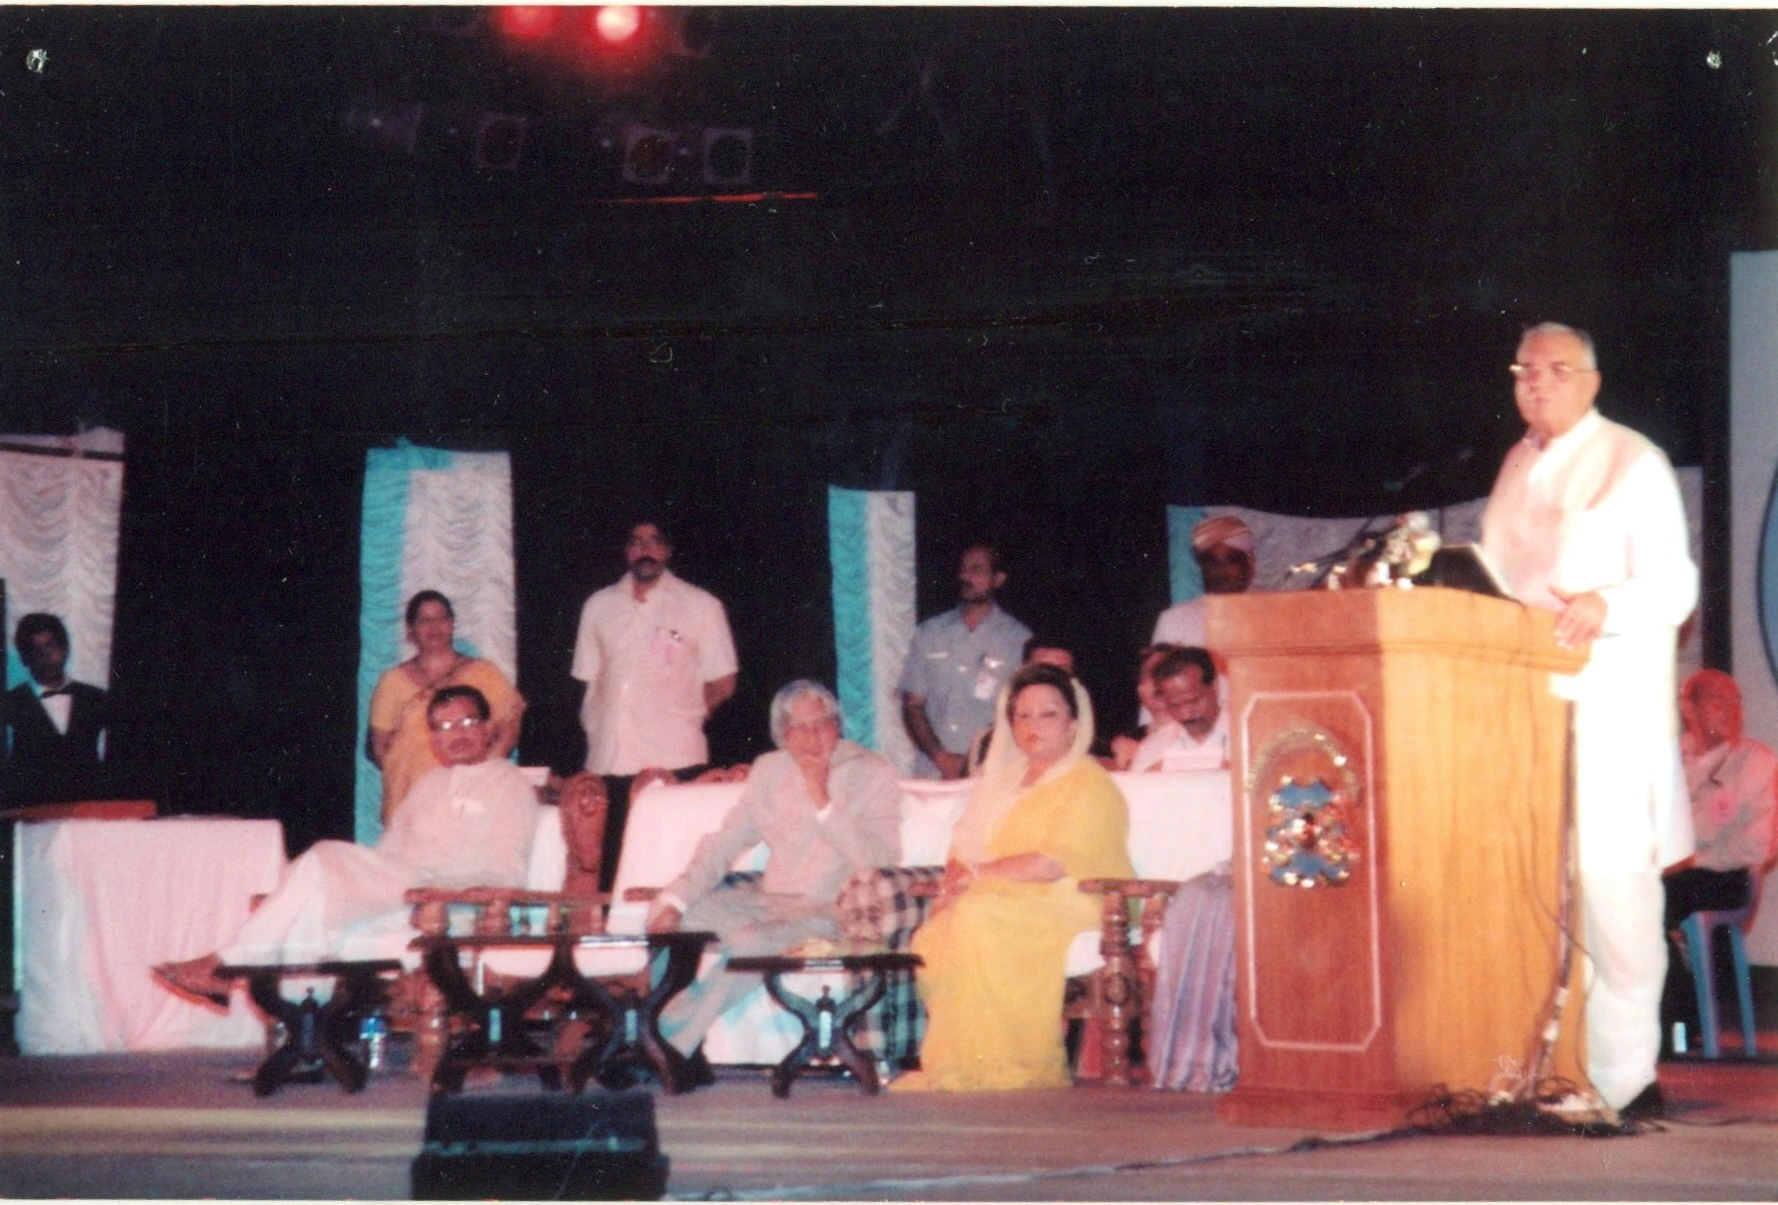 A function photo in which Atal Bihari Vajpayee giving a speech